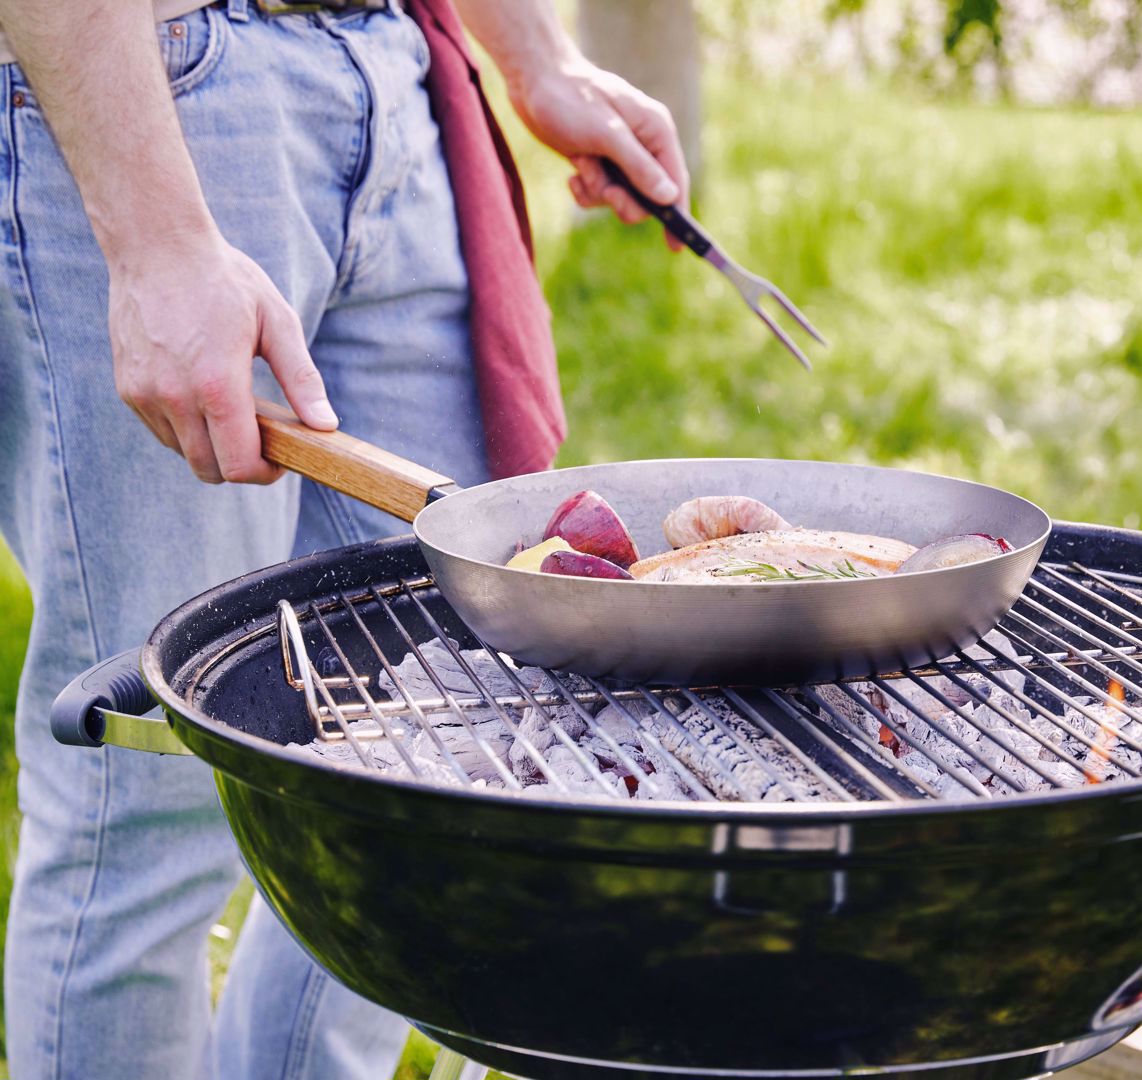 Hybrid grilling: a new summer tune